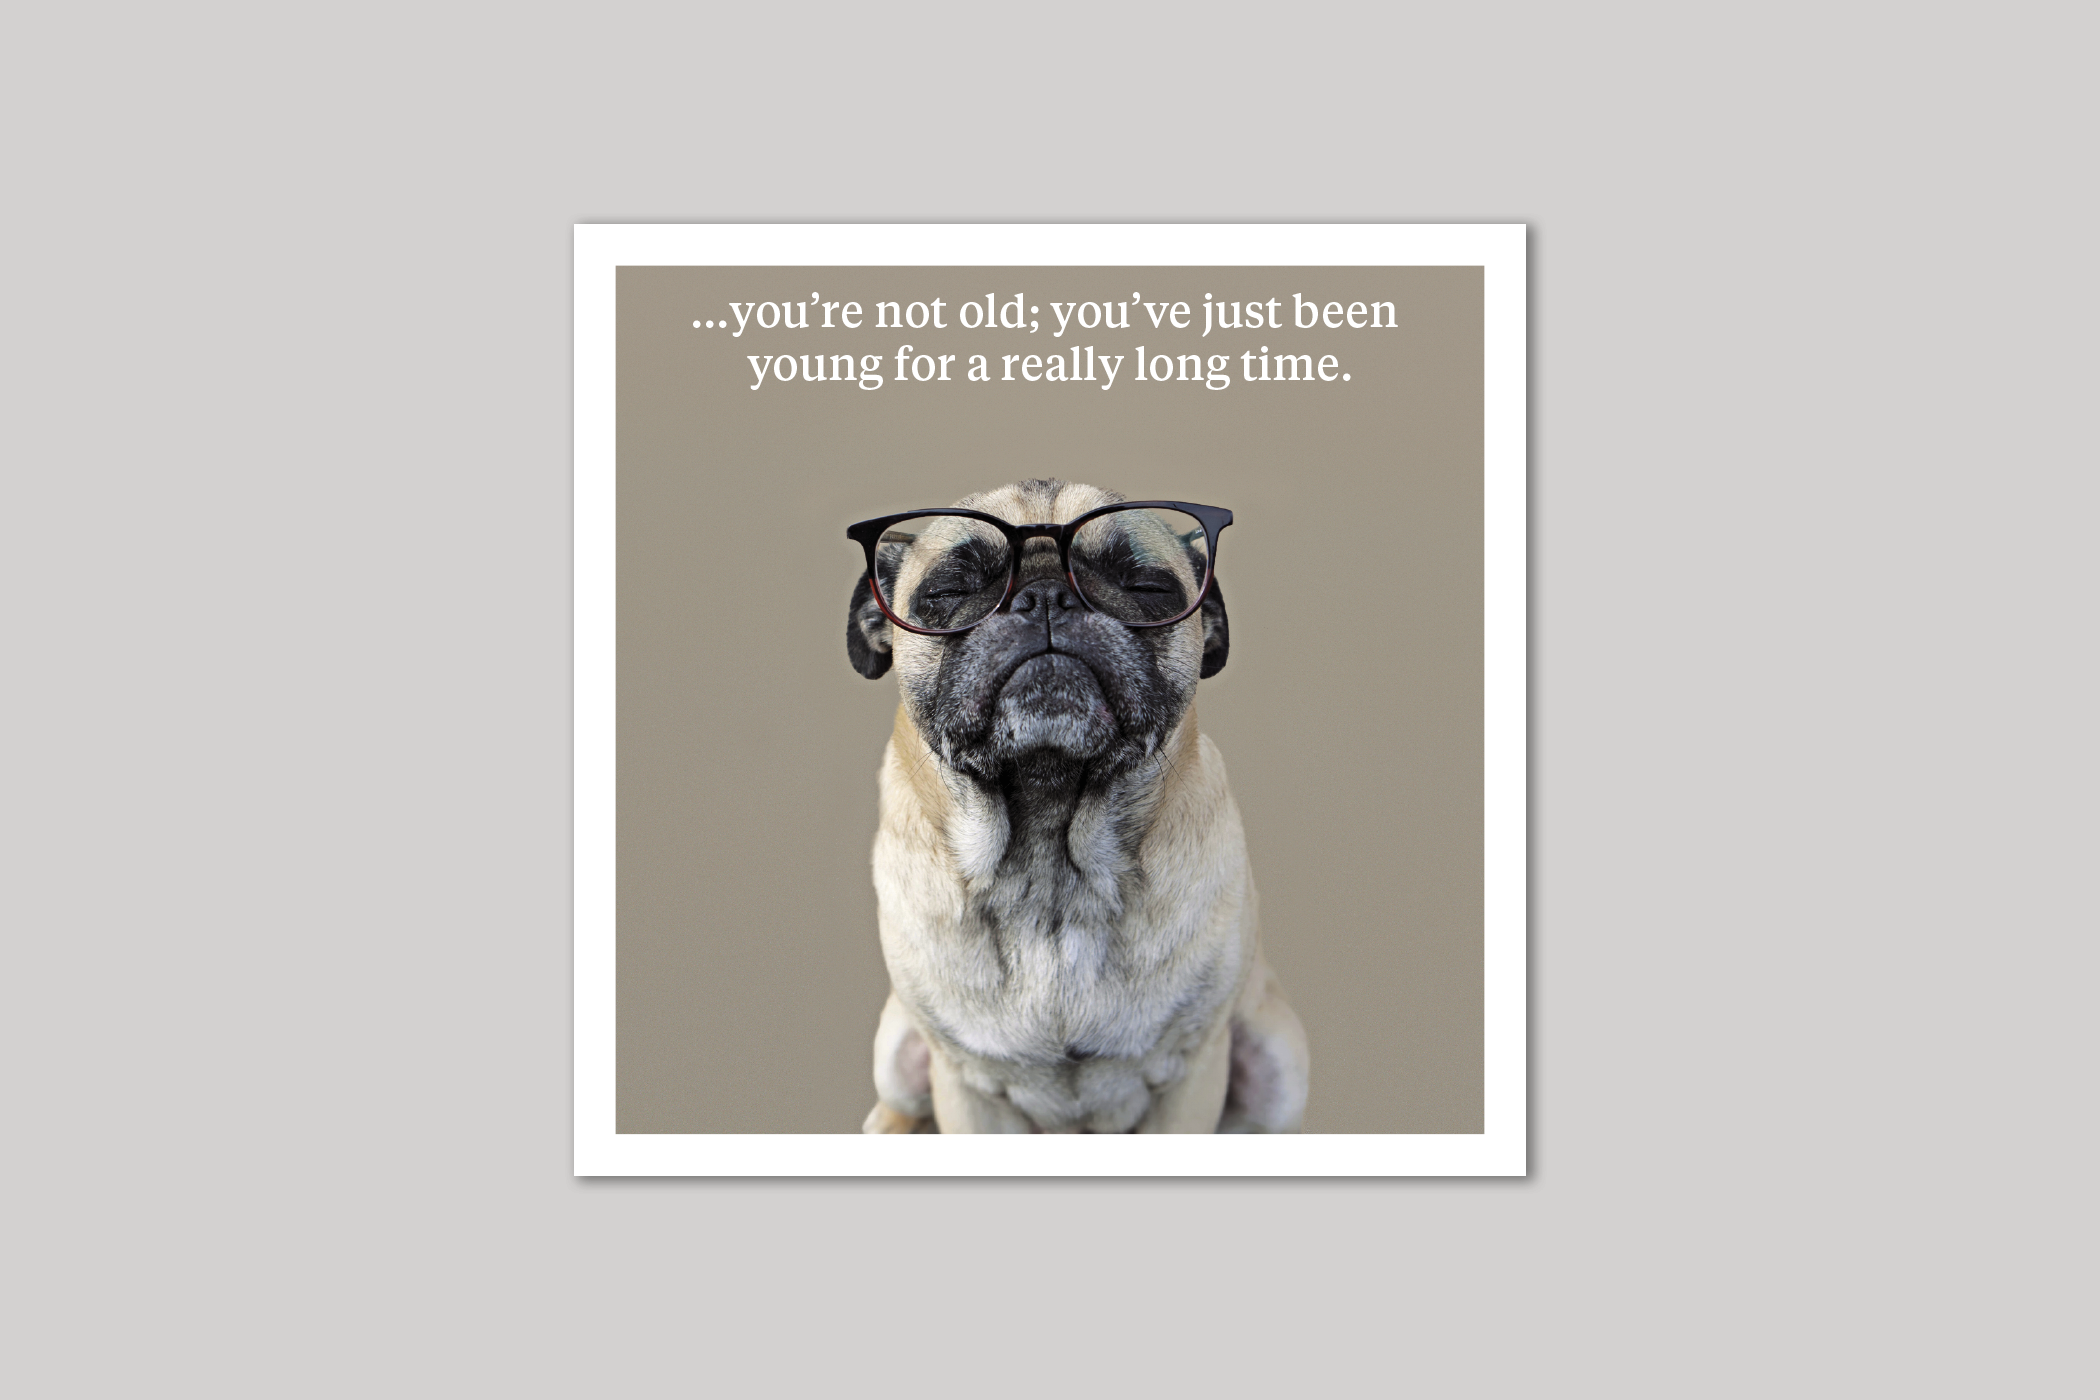 You're Not Old quirky animal portrait from Curious World range of greeting cards by Icon.